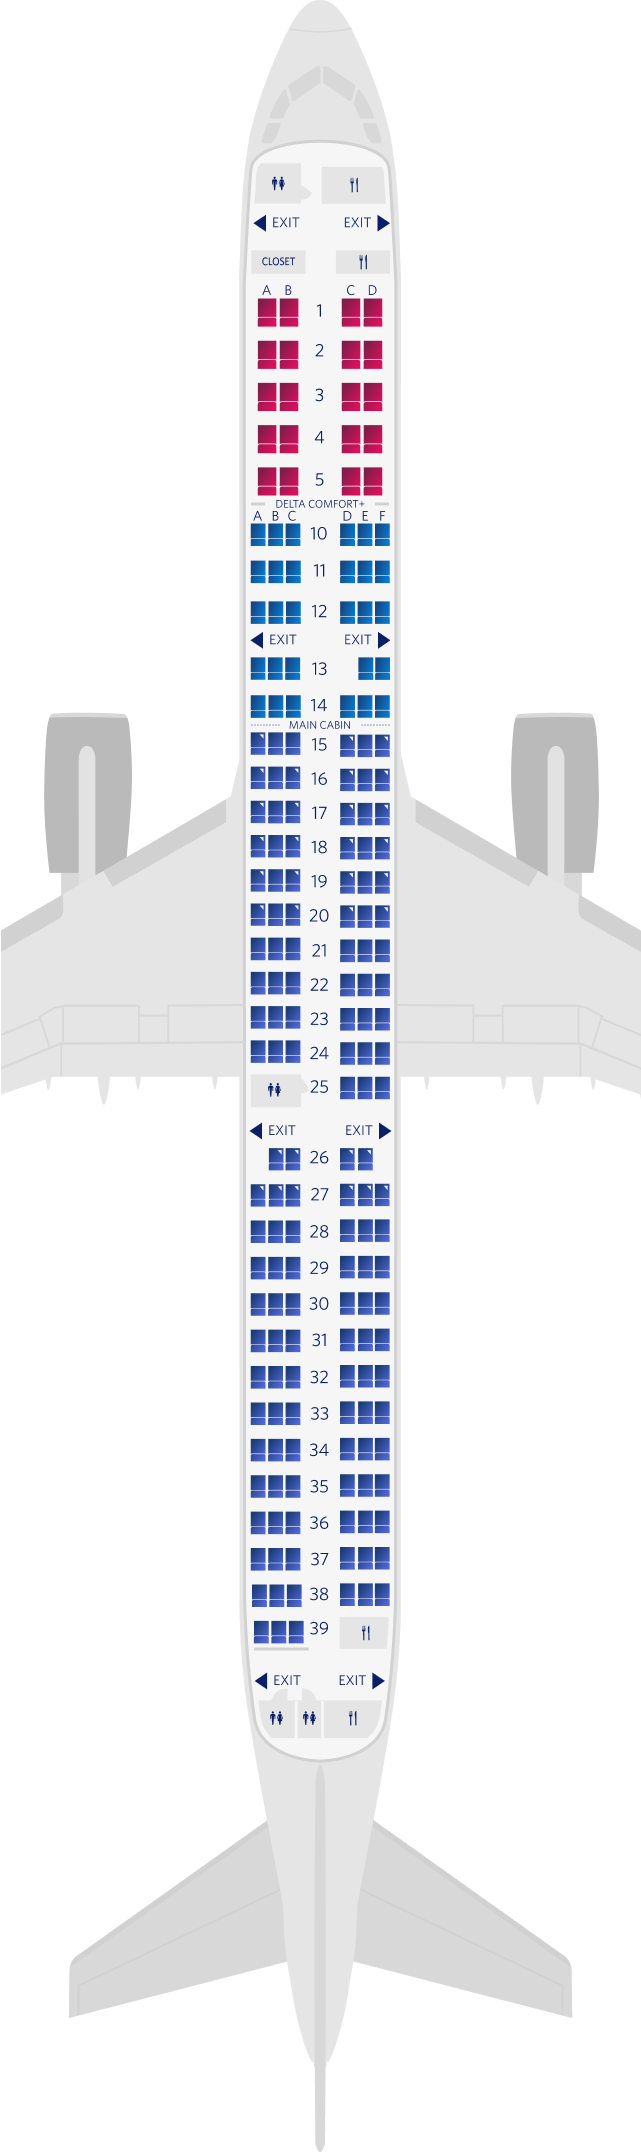 Airbus A321-200 3-Cabin Seat Map